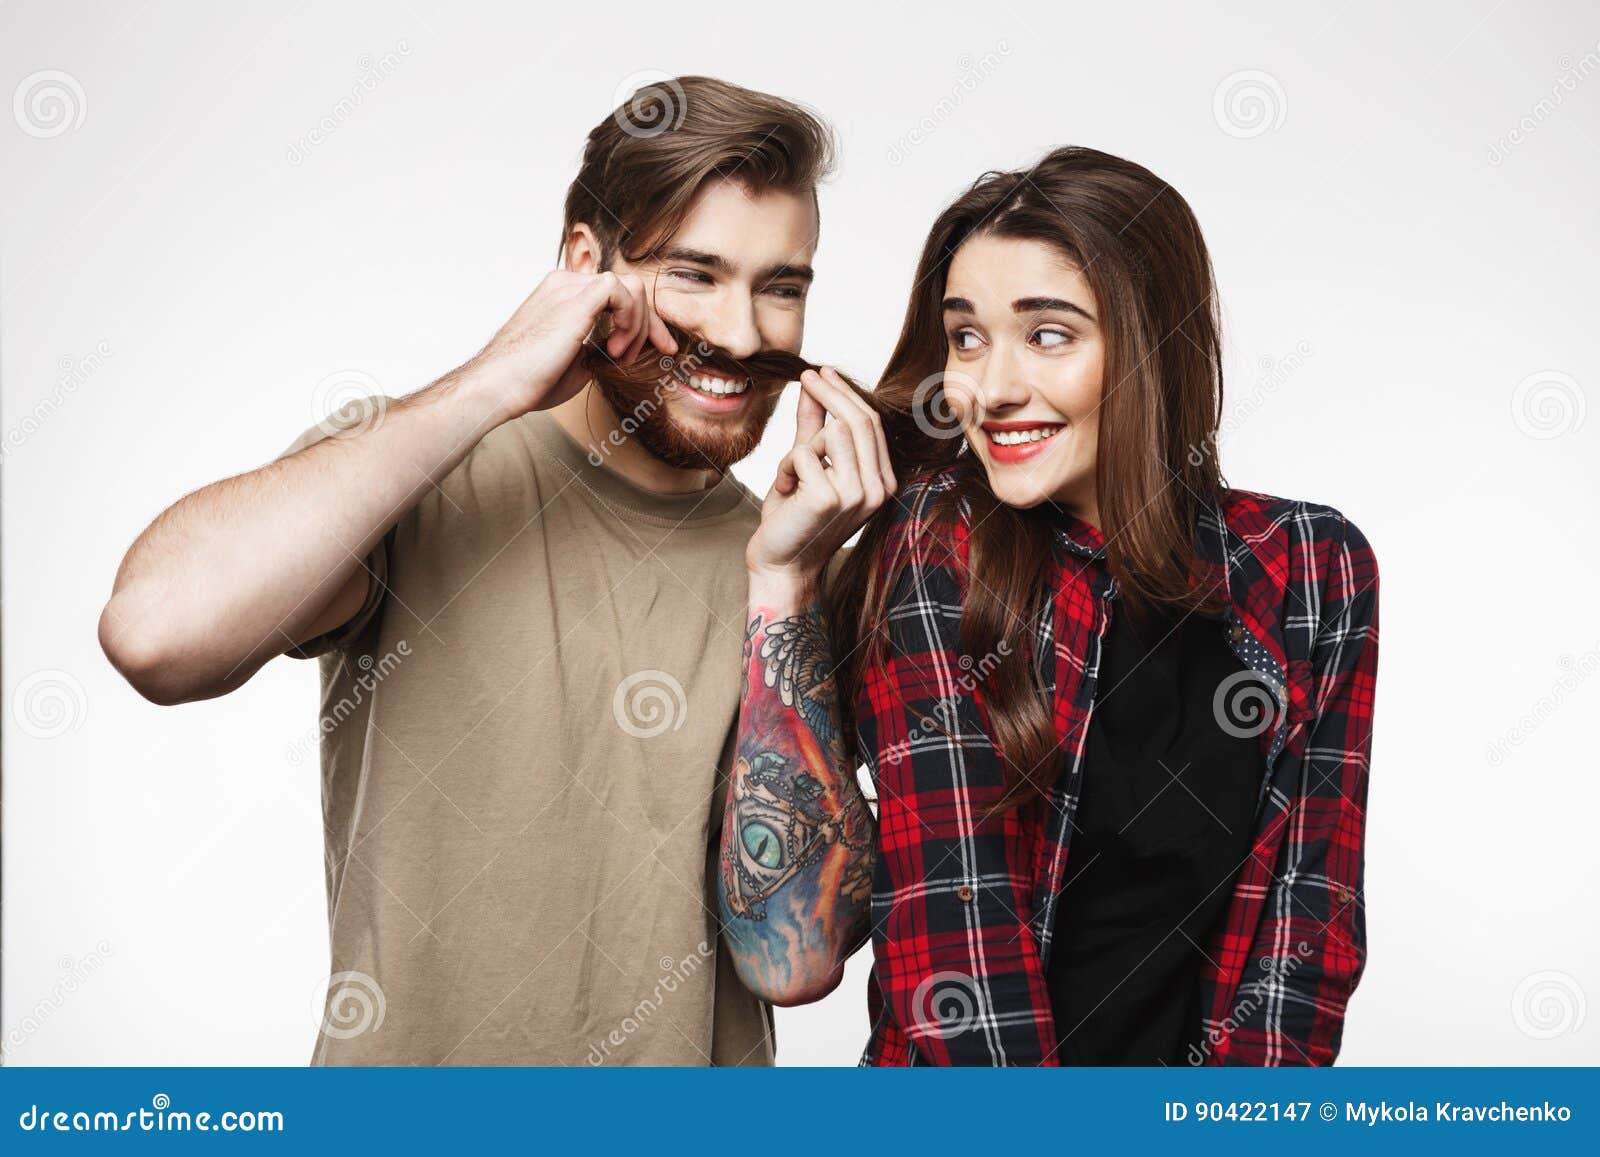 Man Making Funny Faces Playing with Girl`s Hair on White. Stock Image -  Image of handsome, attractive: 90422147